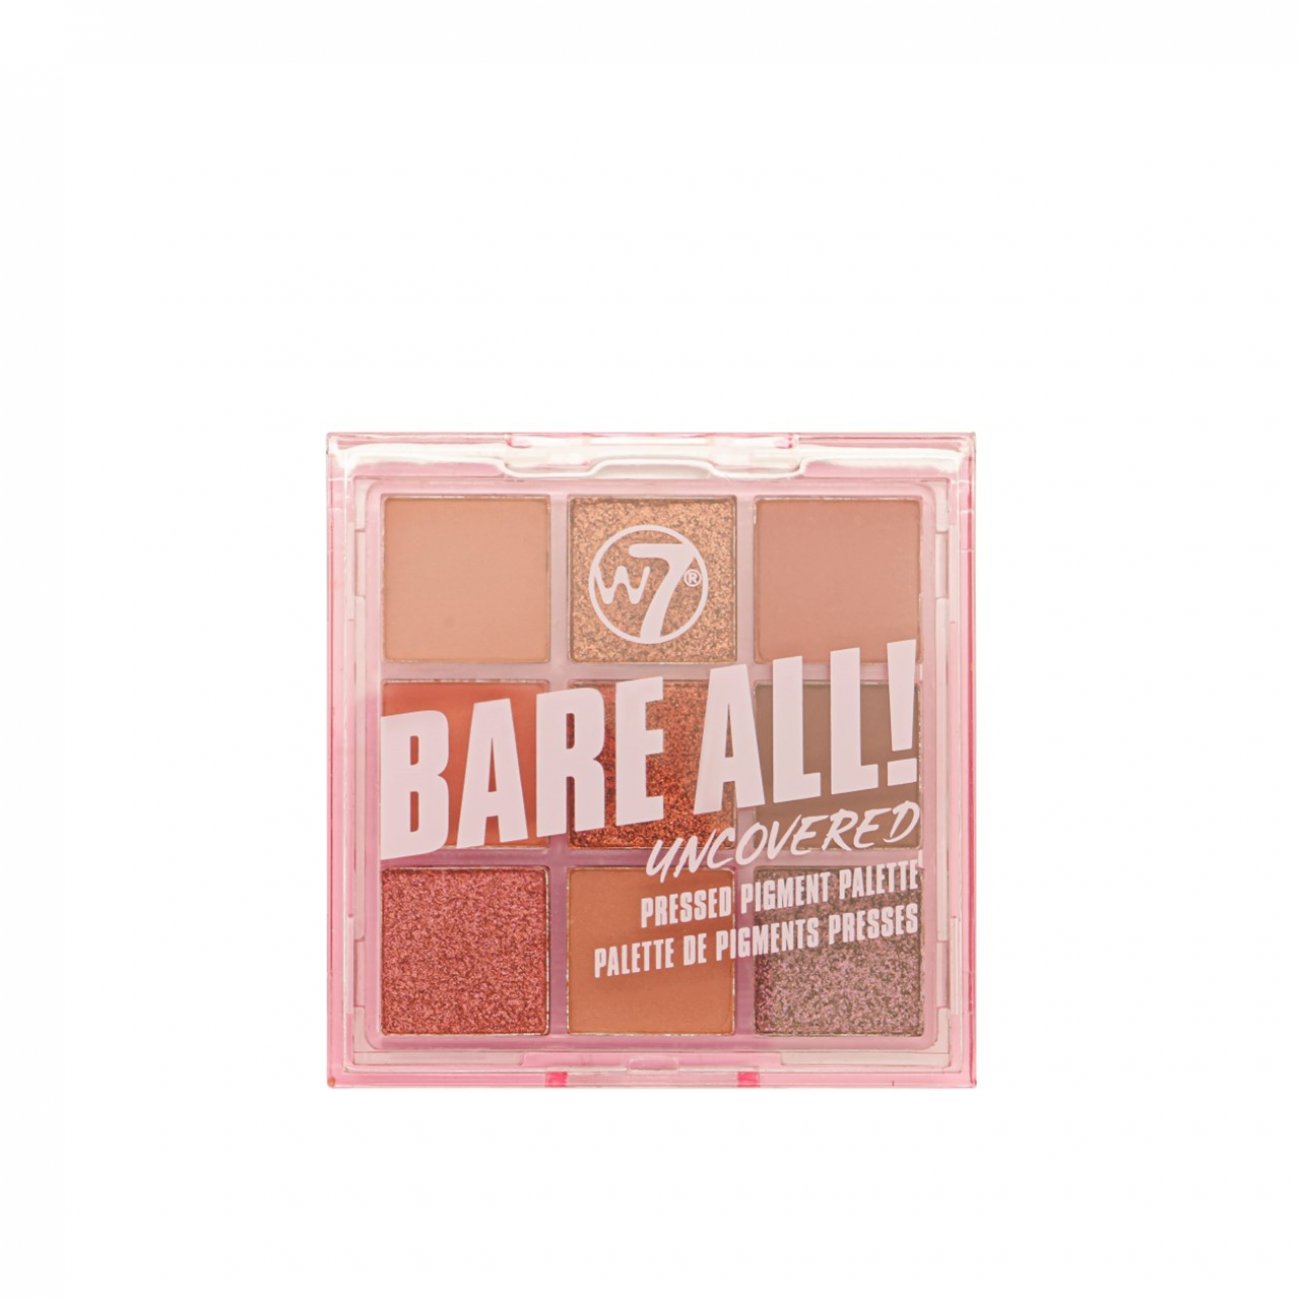 Buy W7 Makeup Bare All! Pressed Pigment Palette 8.1g (0.28 oz) USA